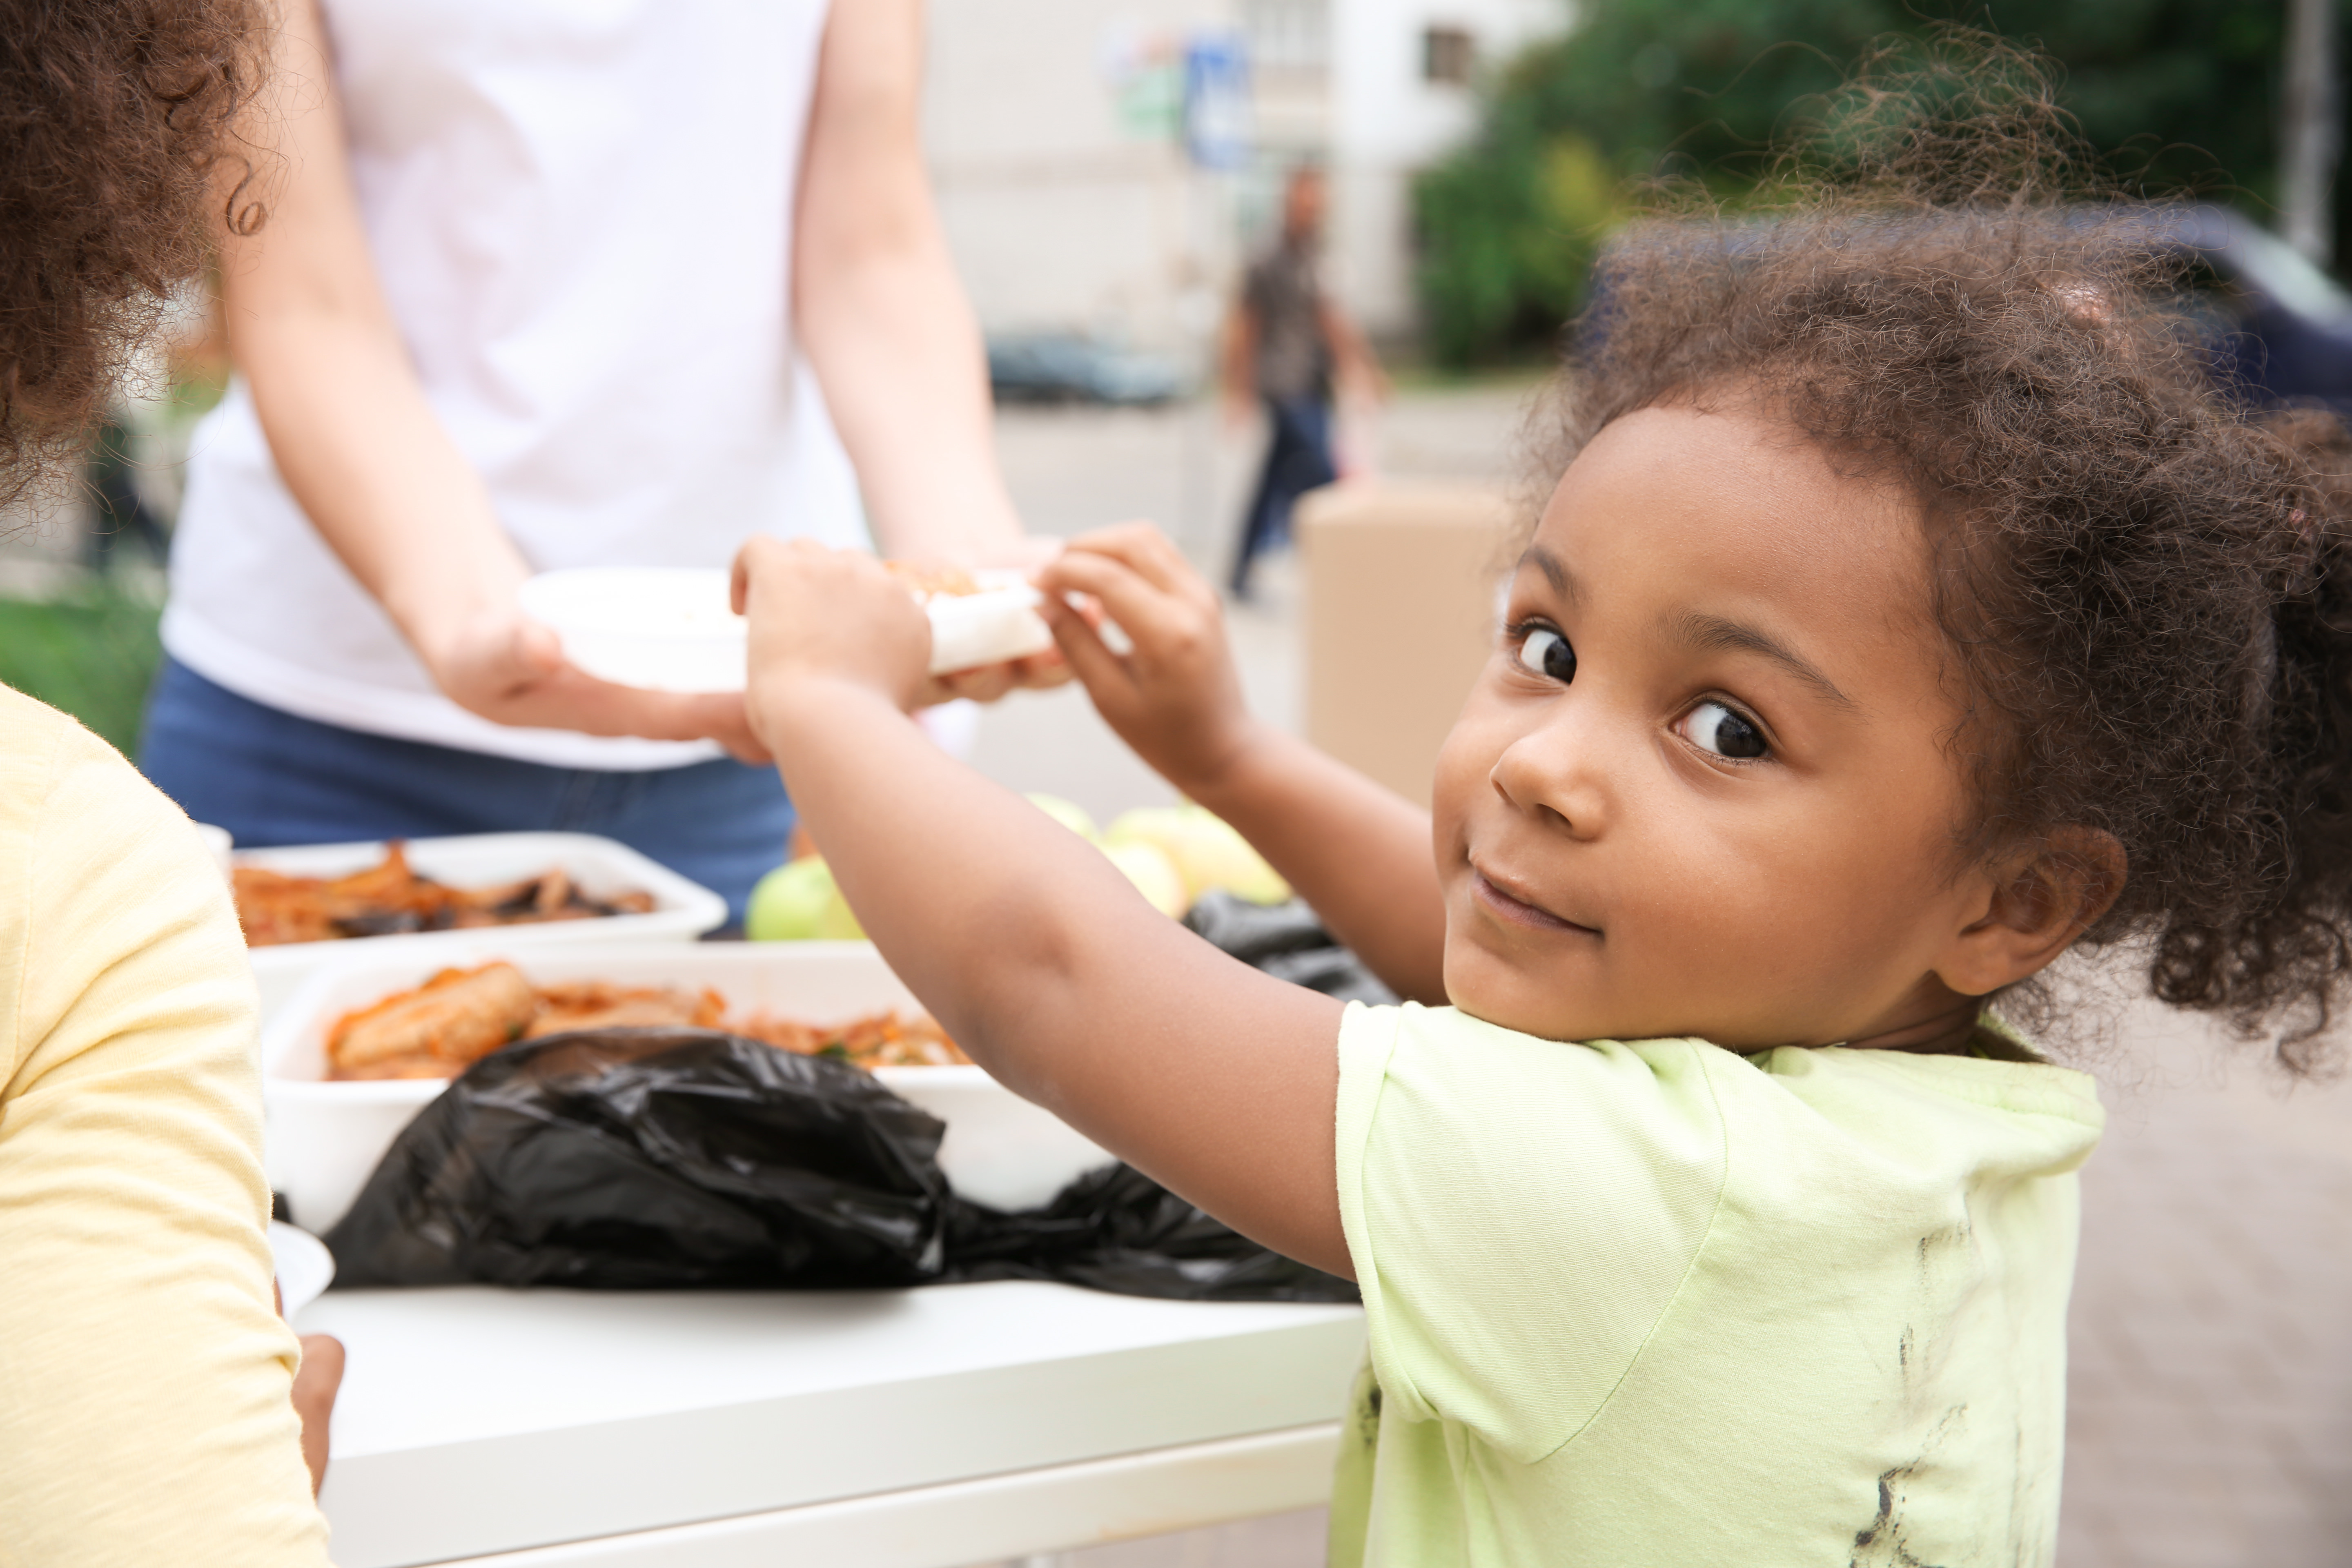 Volunteer sharing food with child outdoors